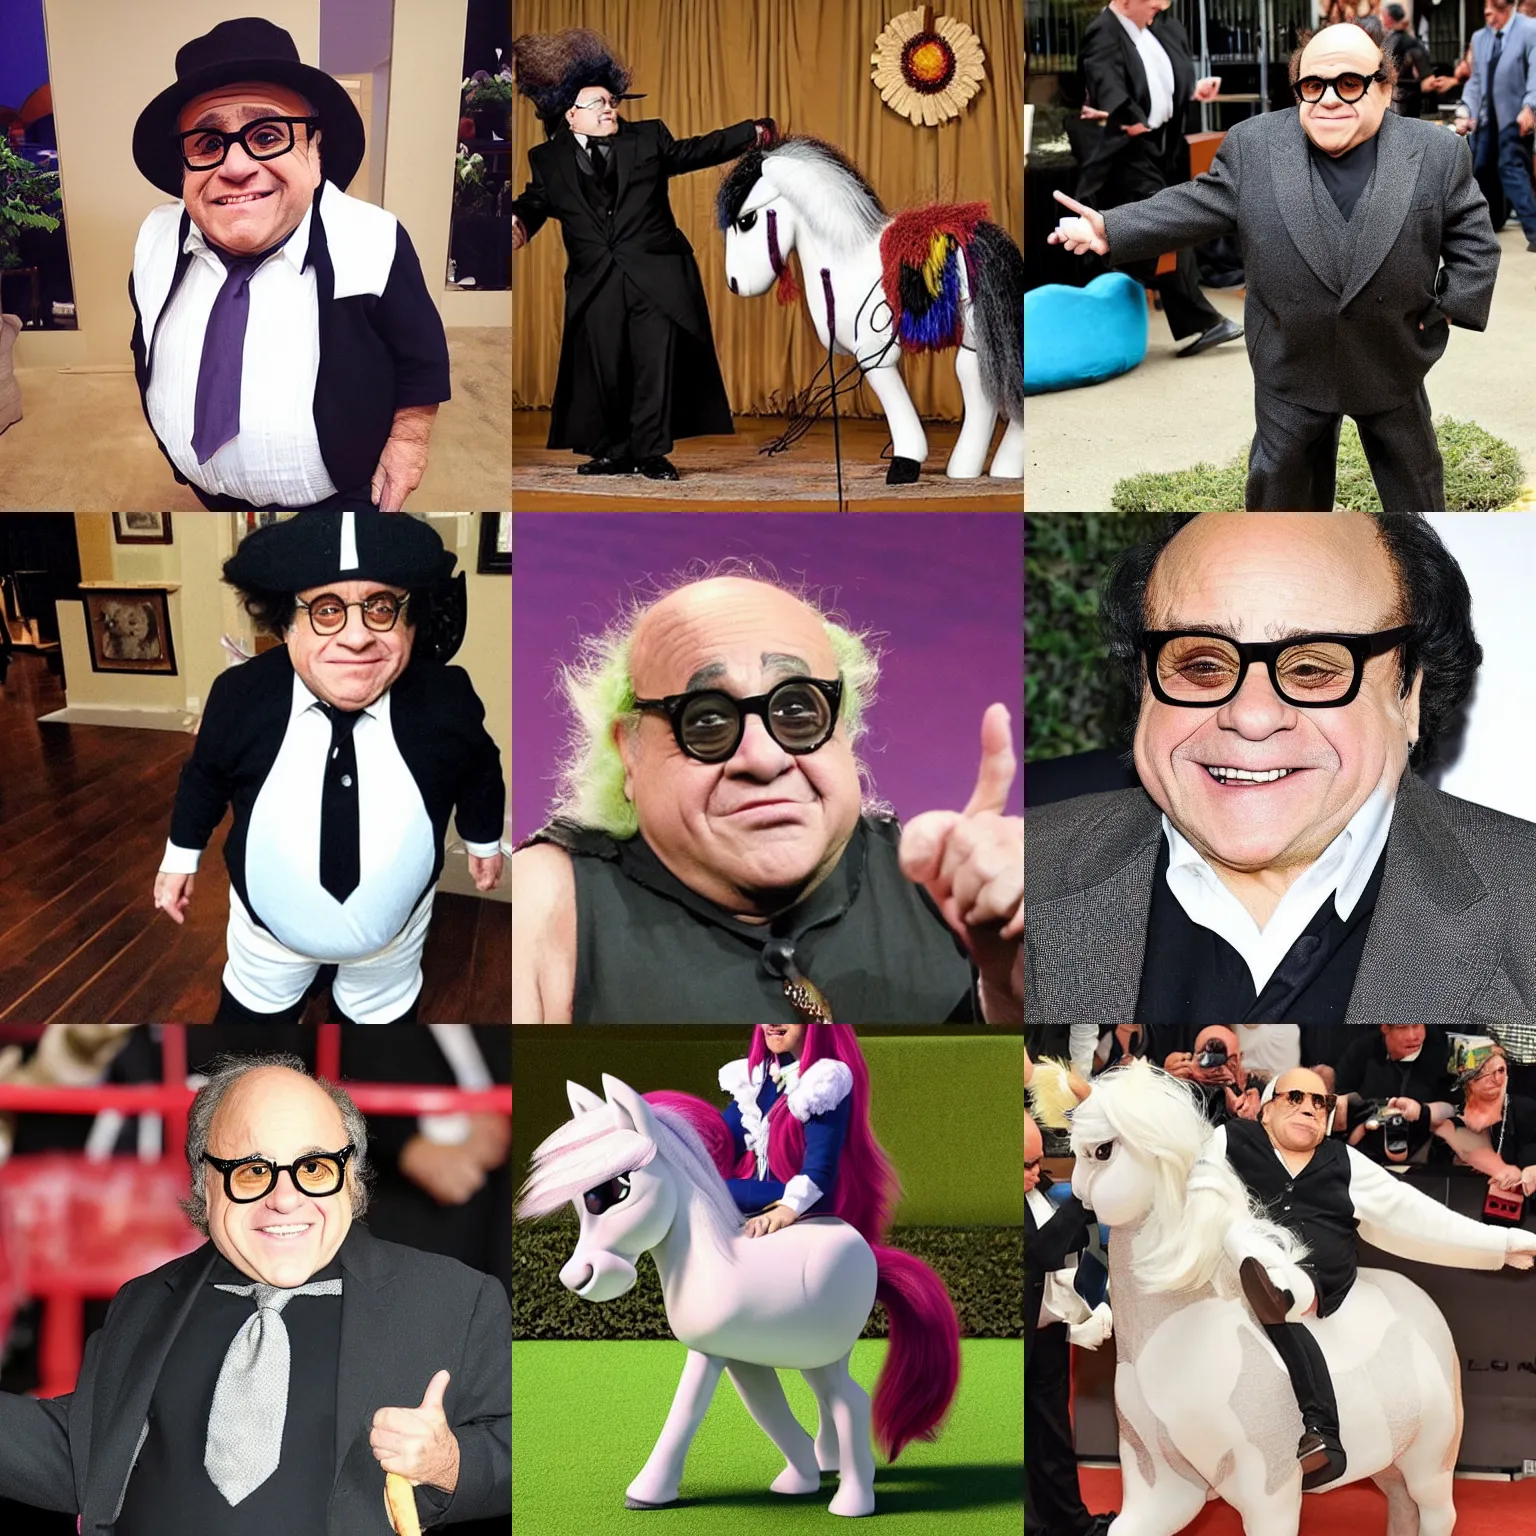 Prompt: Danny devito cosplaying as a pony, intricate, elegant,